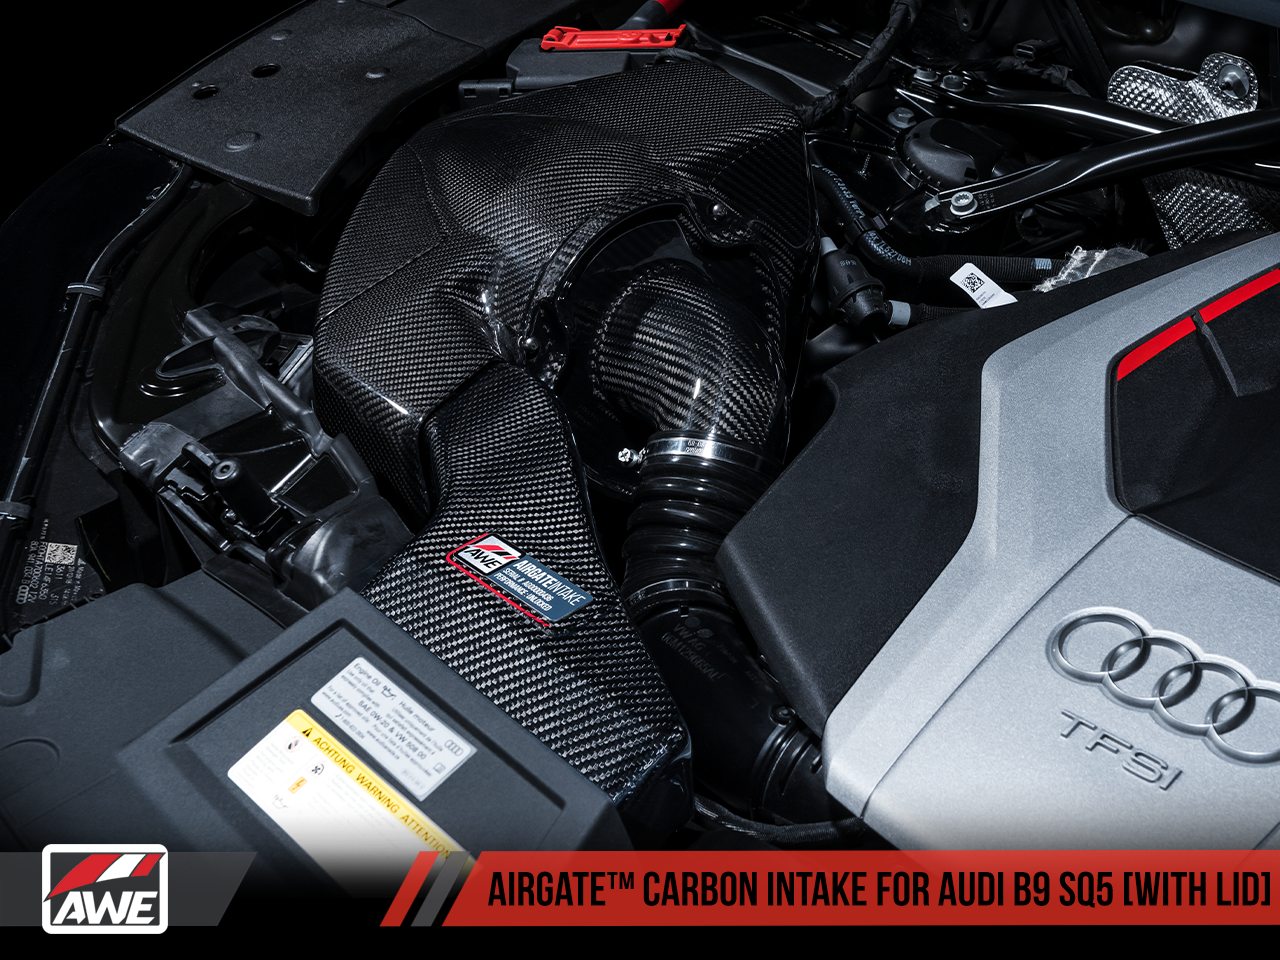 AWE AirGate™ Carbon Fiber Intake for Audi B9 SQ5 3.0T - With Lid